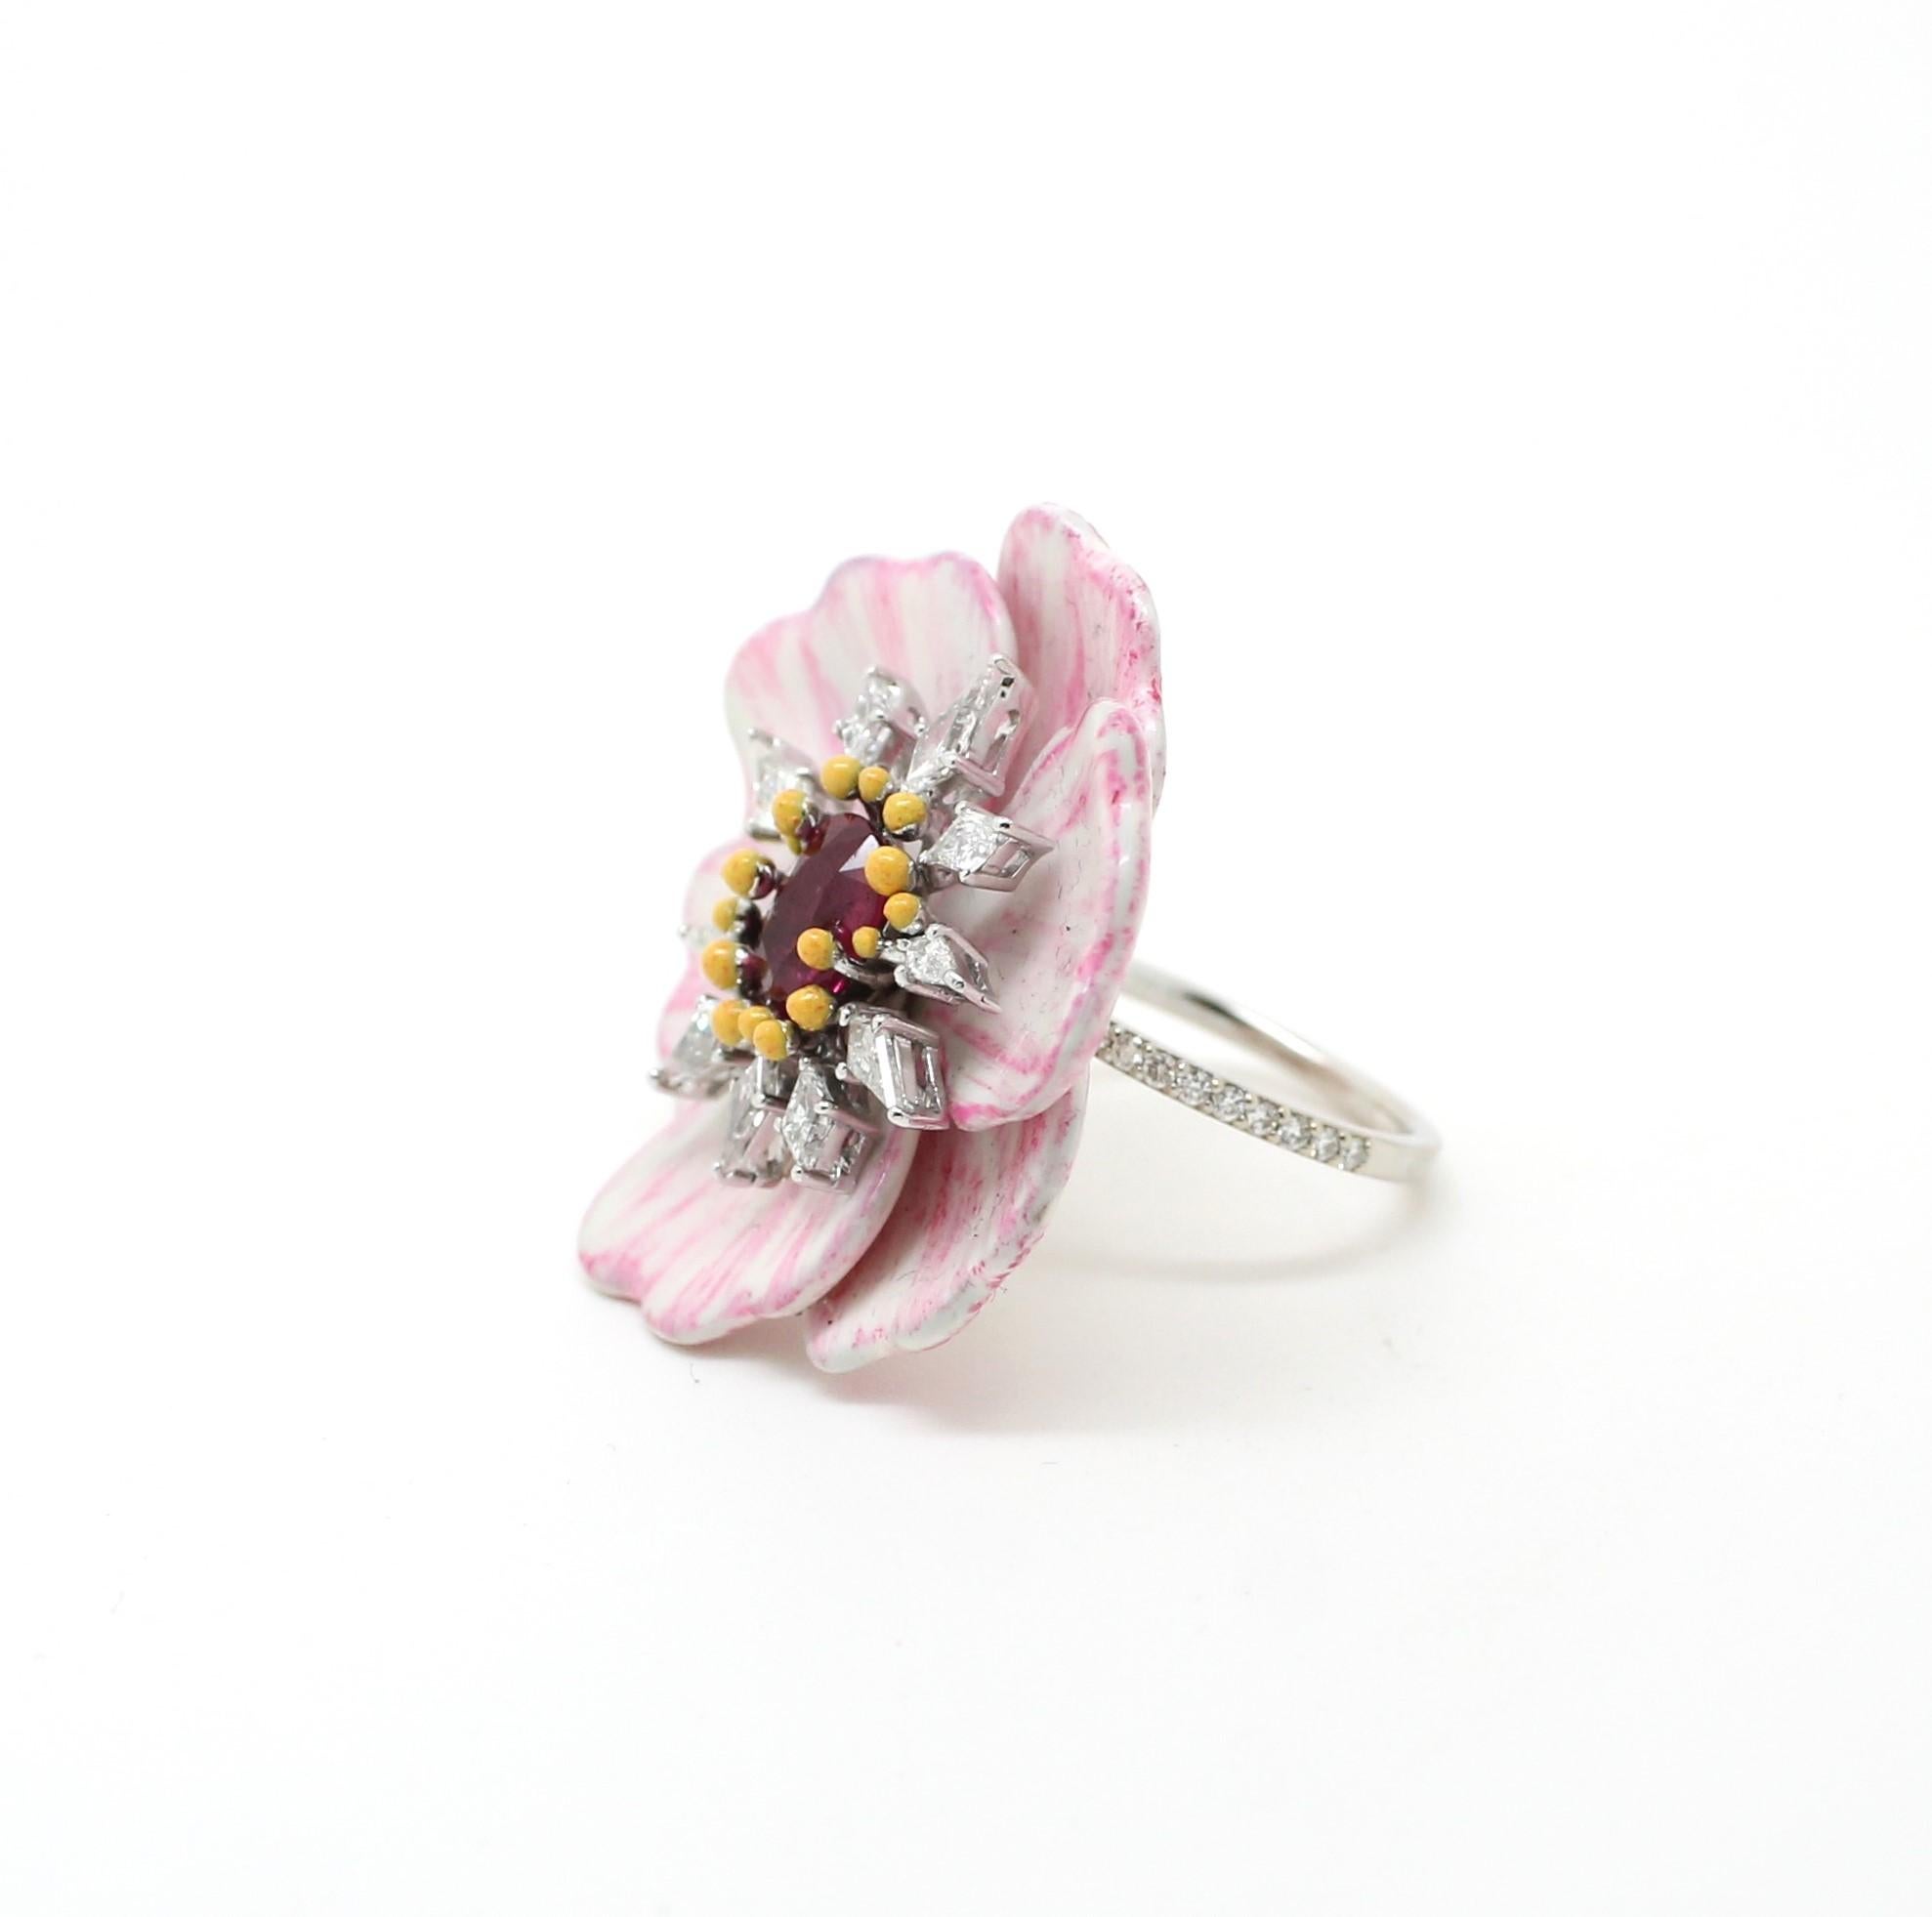 Oval Cut 1.36 Carat Ruby with White Kyte Diamonds Hand Painted Anemone Cocktail Ring For Sale